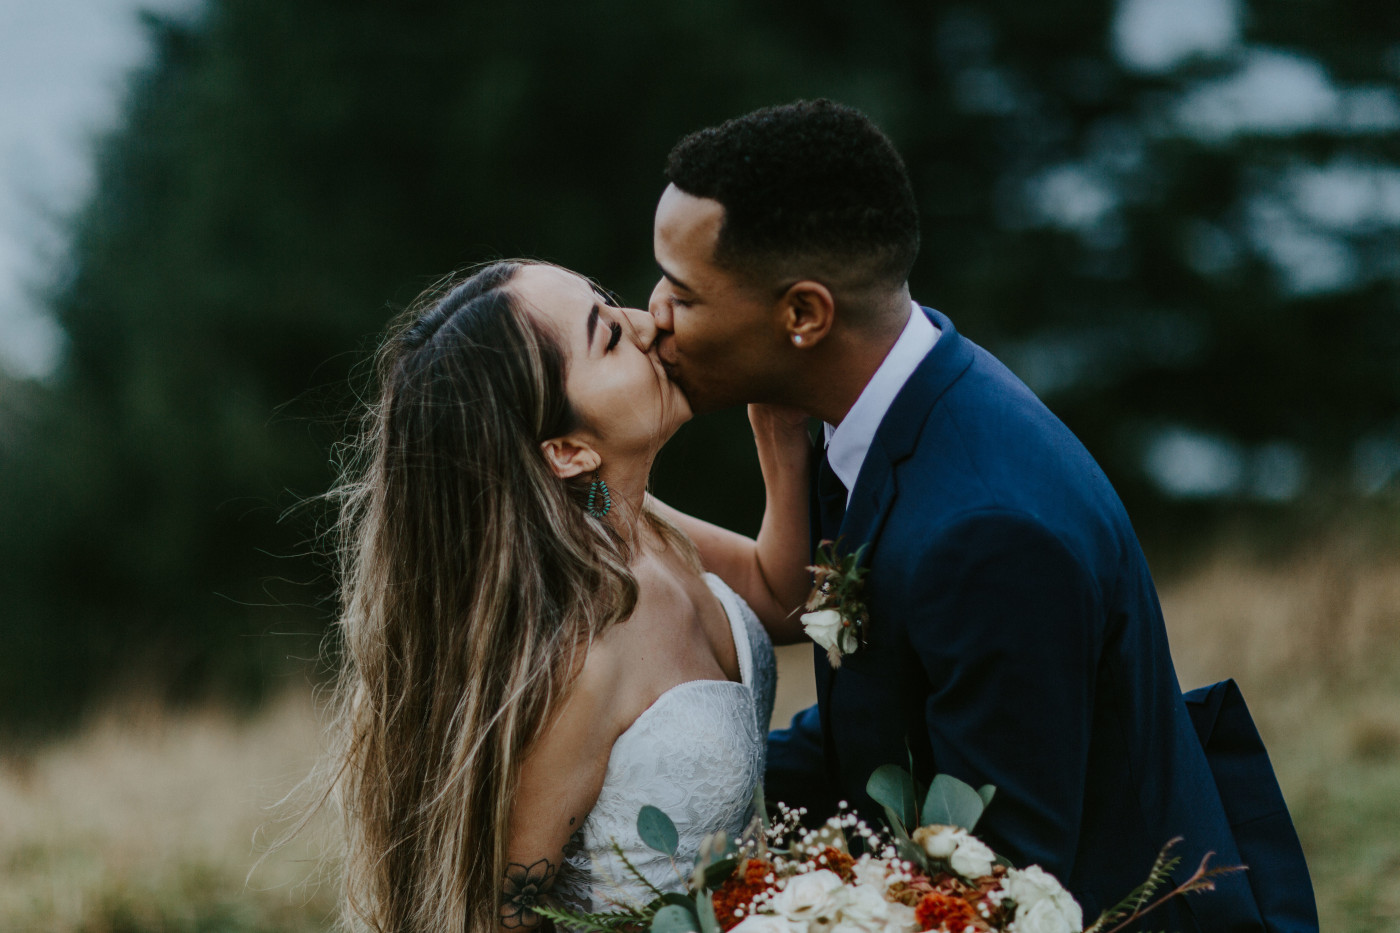 Deandre and Ariana kiss after they elope. Elopement photography at Mount Hood by Sienna Plus Josh.